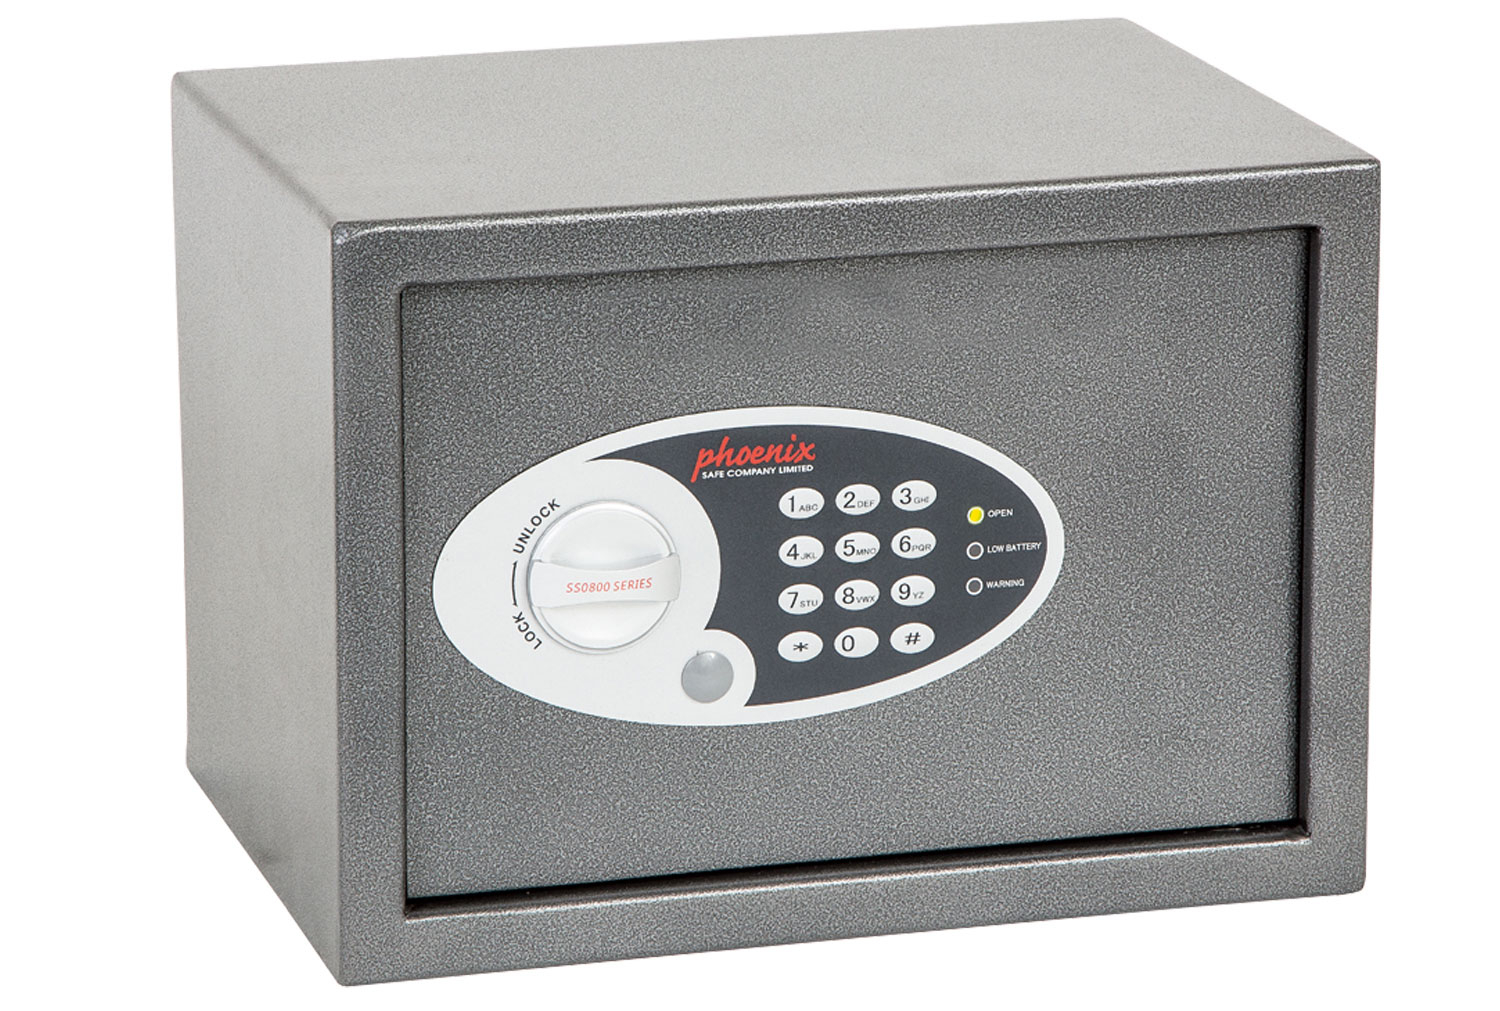 Phoenix Vela SS0802E Home Office Safe With Electronic Lock (17ltrs)